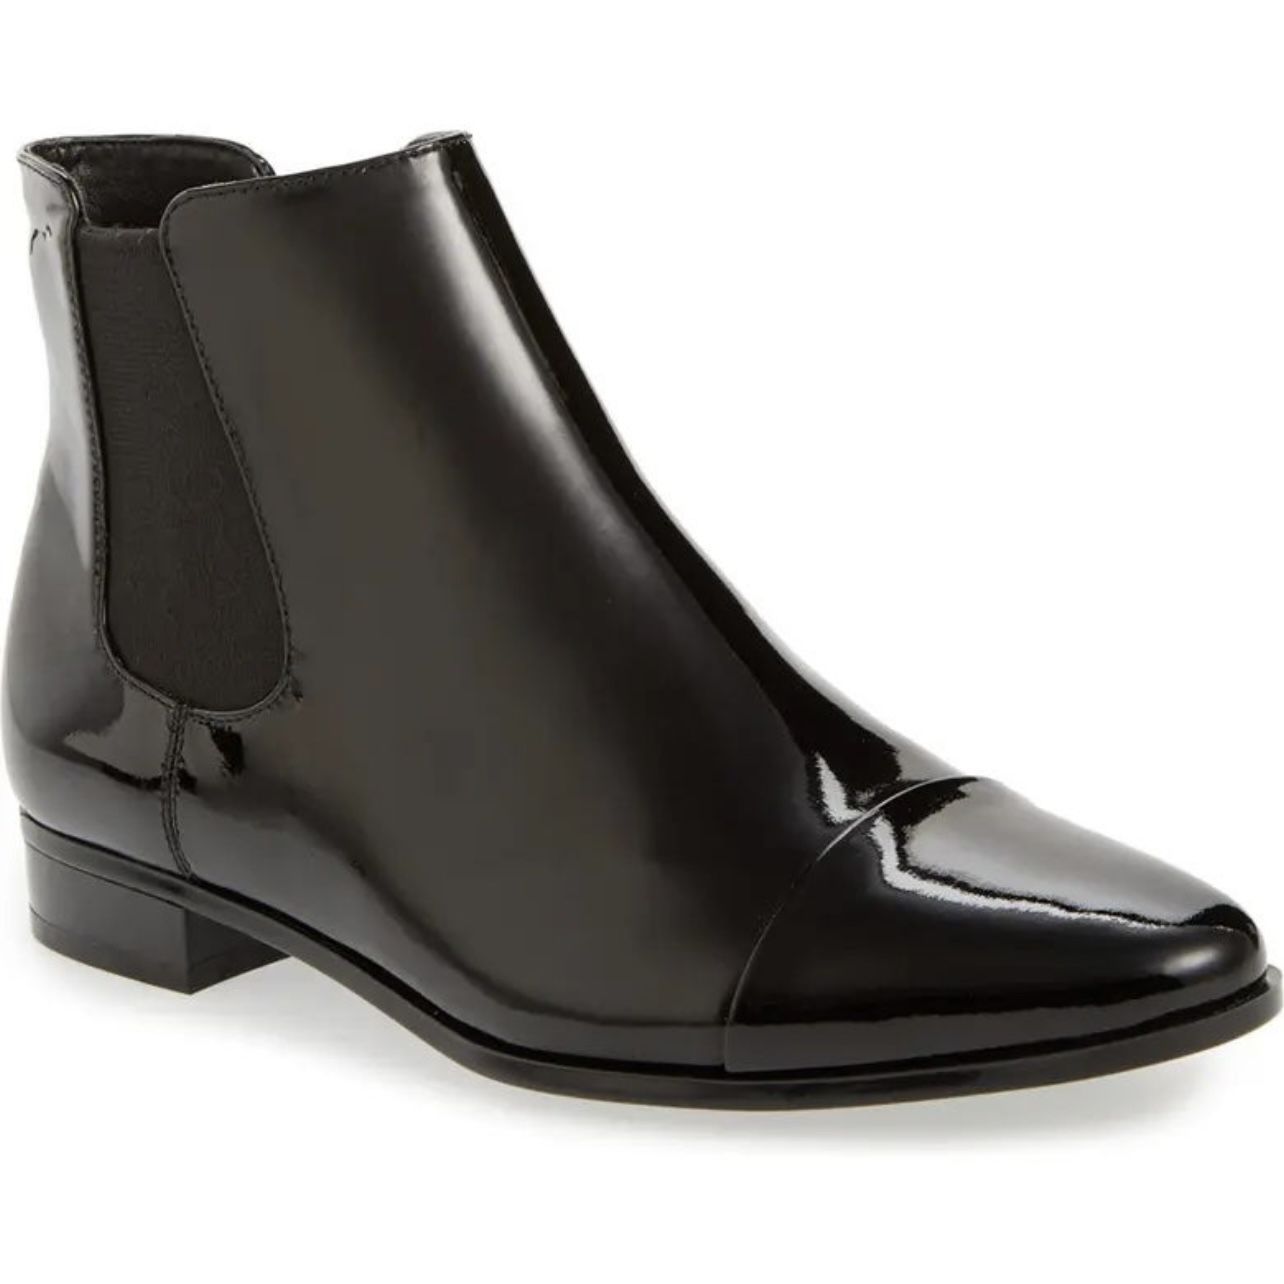 CALVIN KLEIN Black Patent Leather Finilla Glossy Pull On Chelsea Ankle Boots